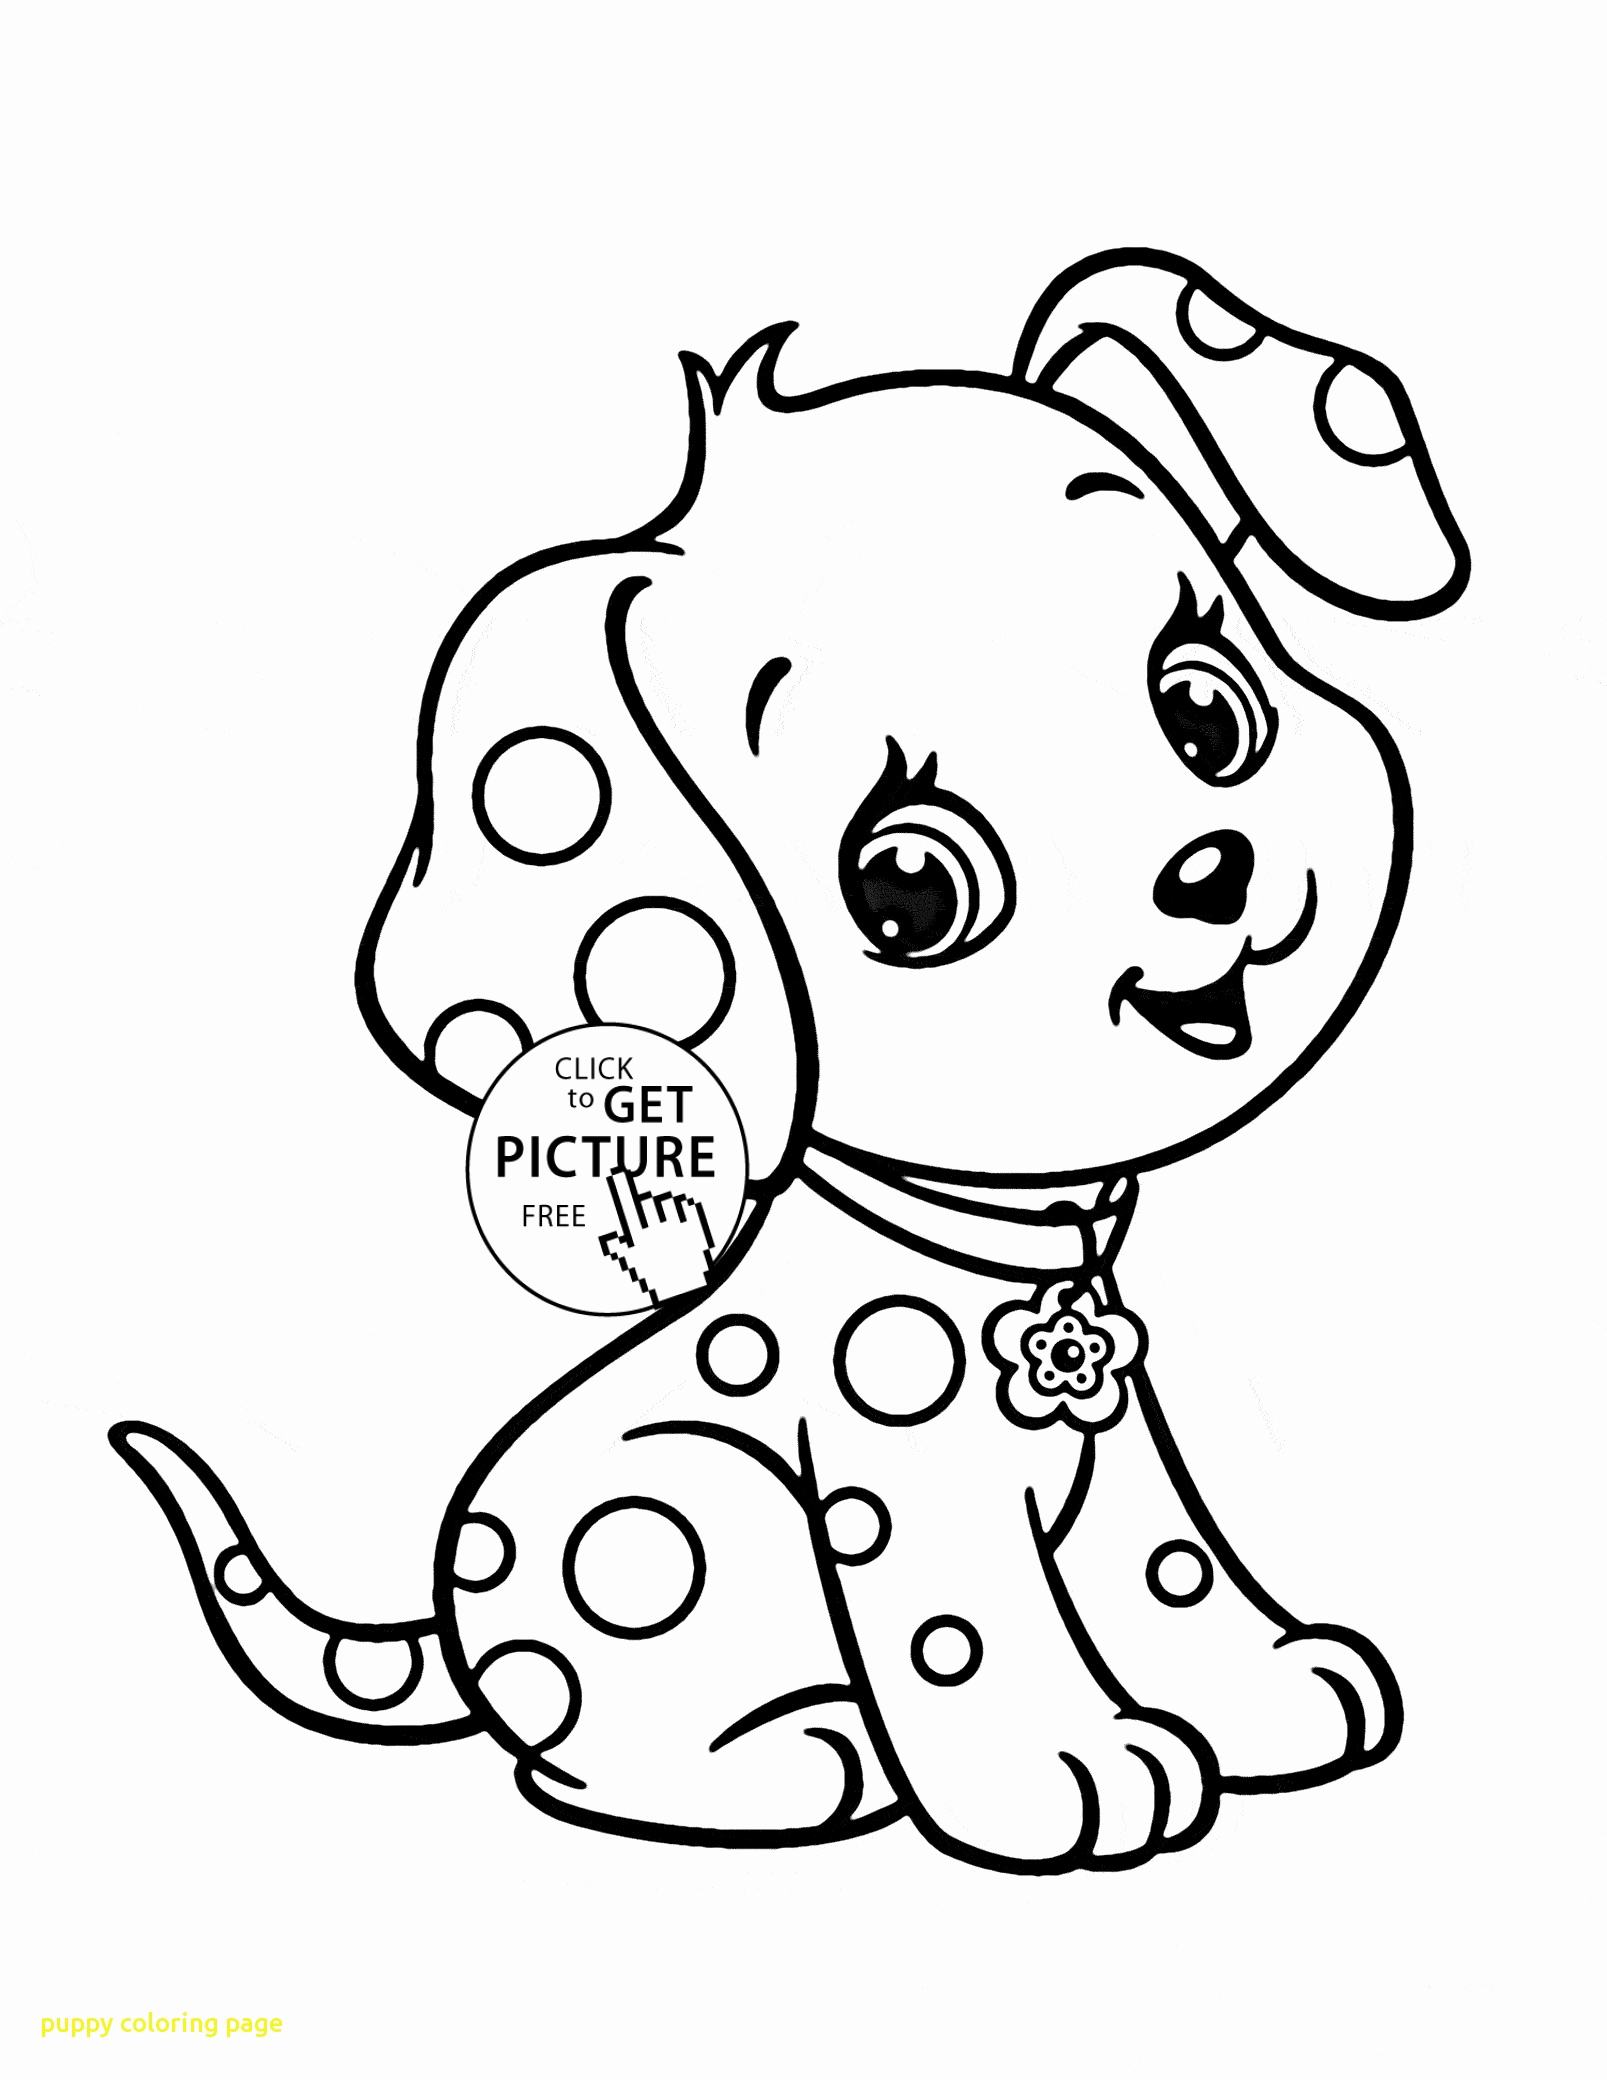 Princess Puppy Coloring Pages at GetColorings.com | Free printable